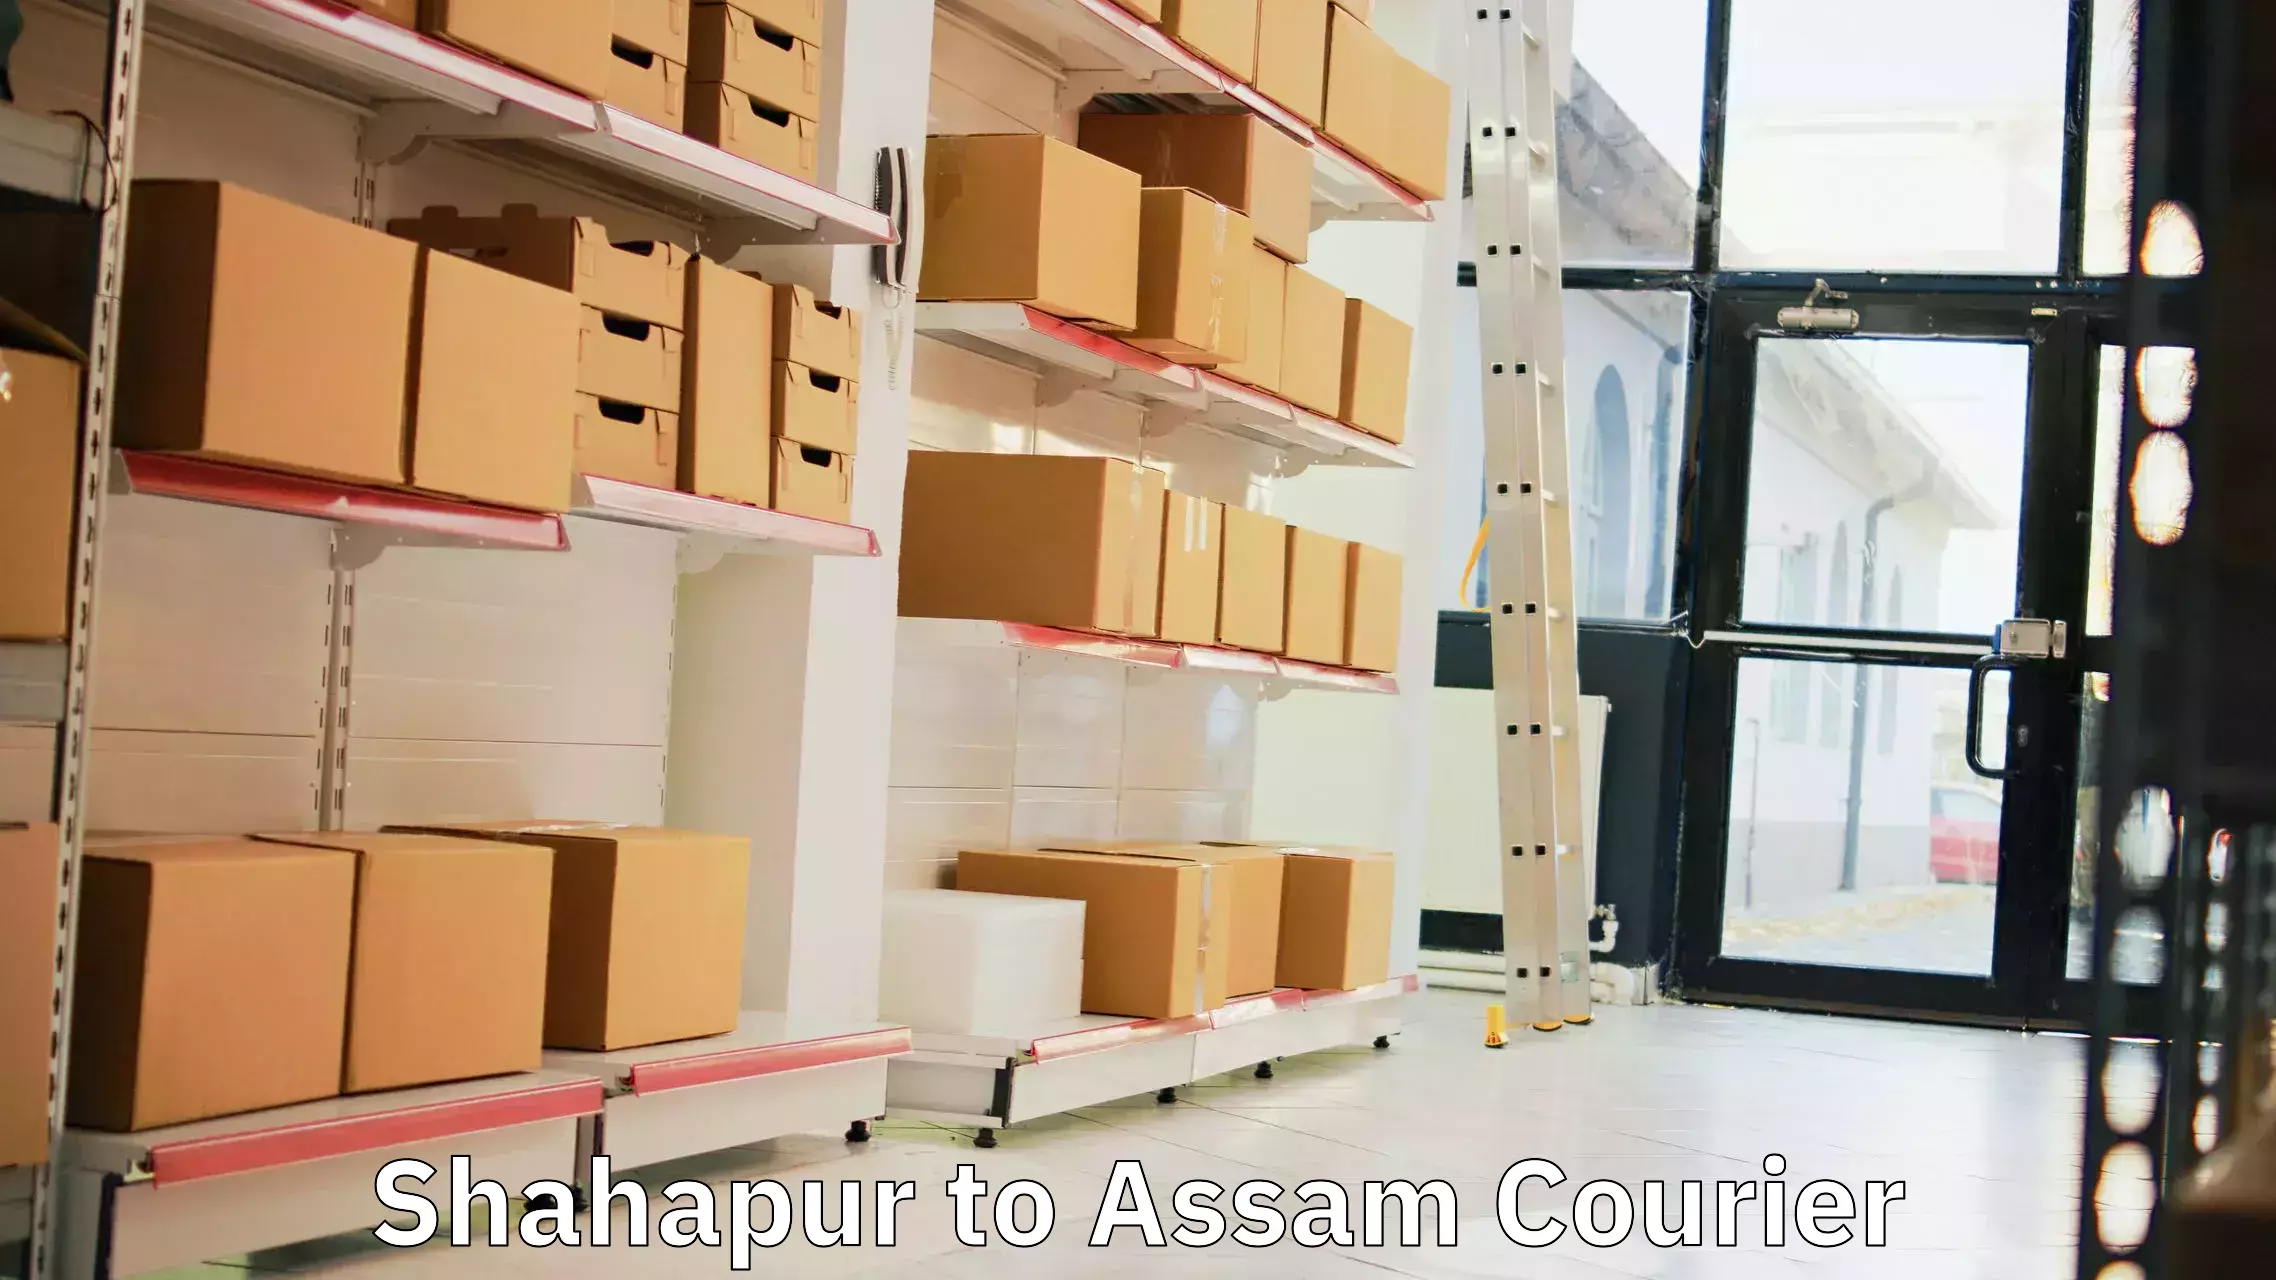 Business delivery service Shahapur to Assam